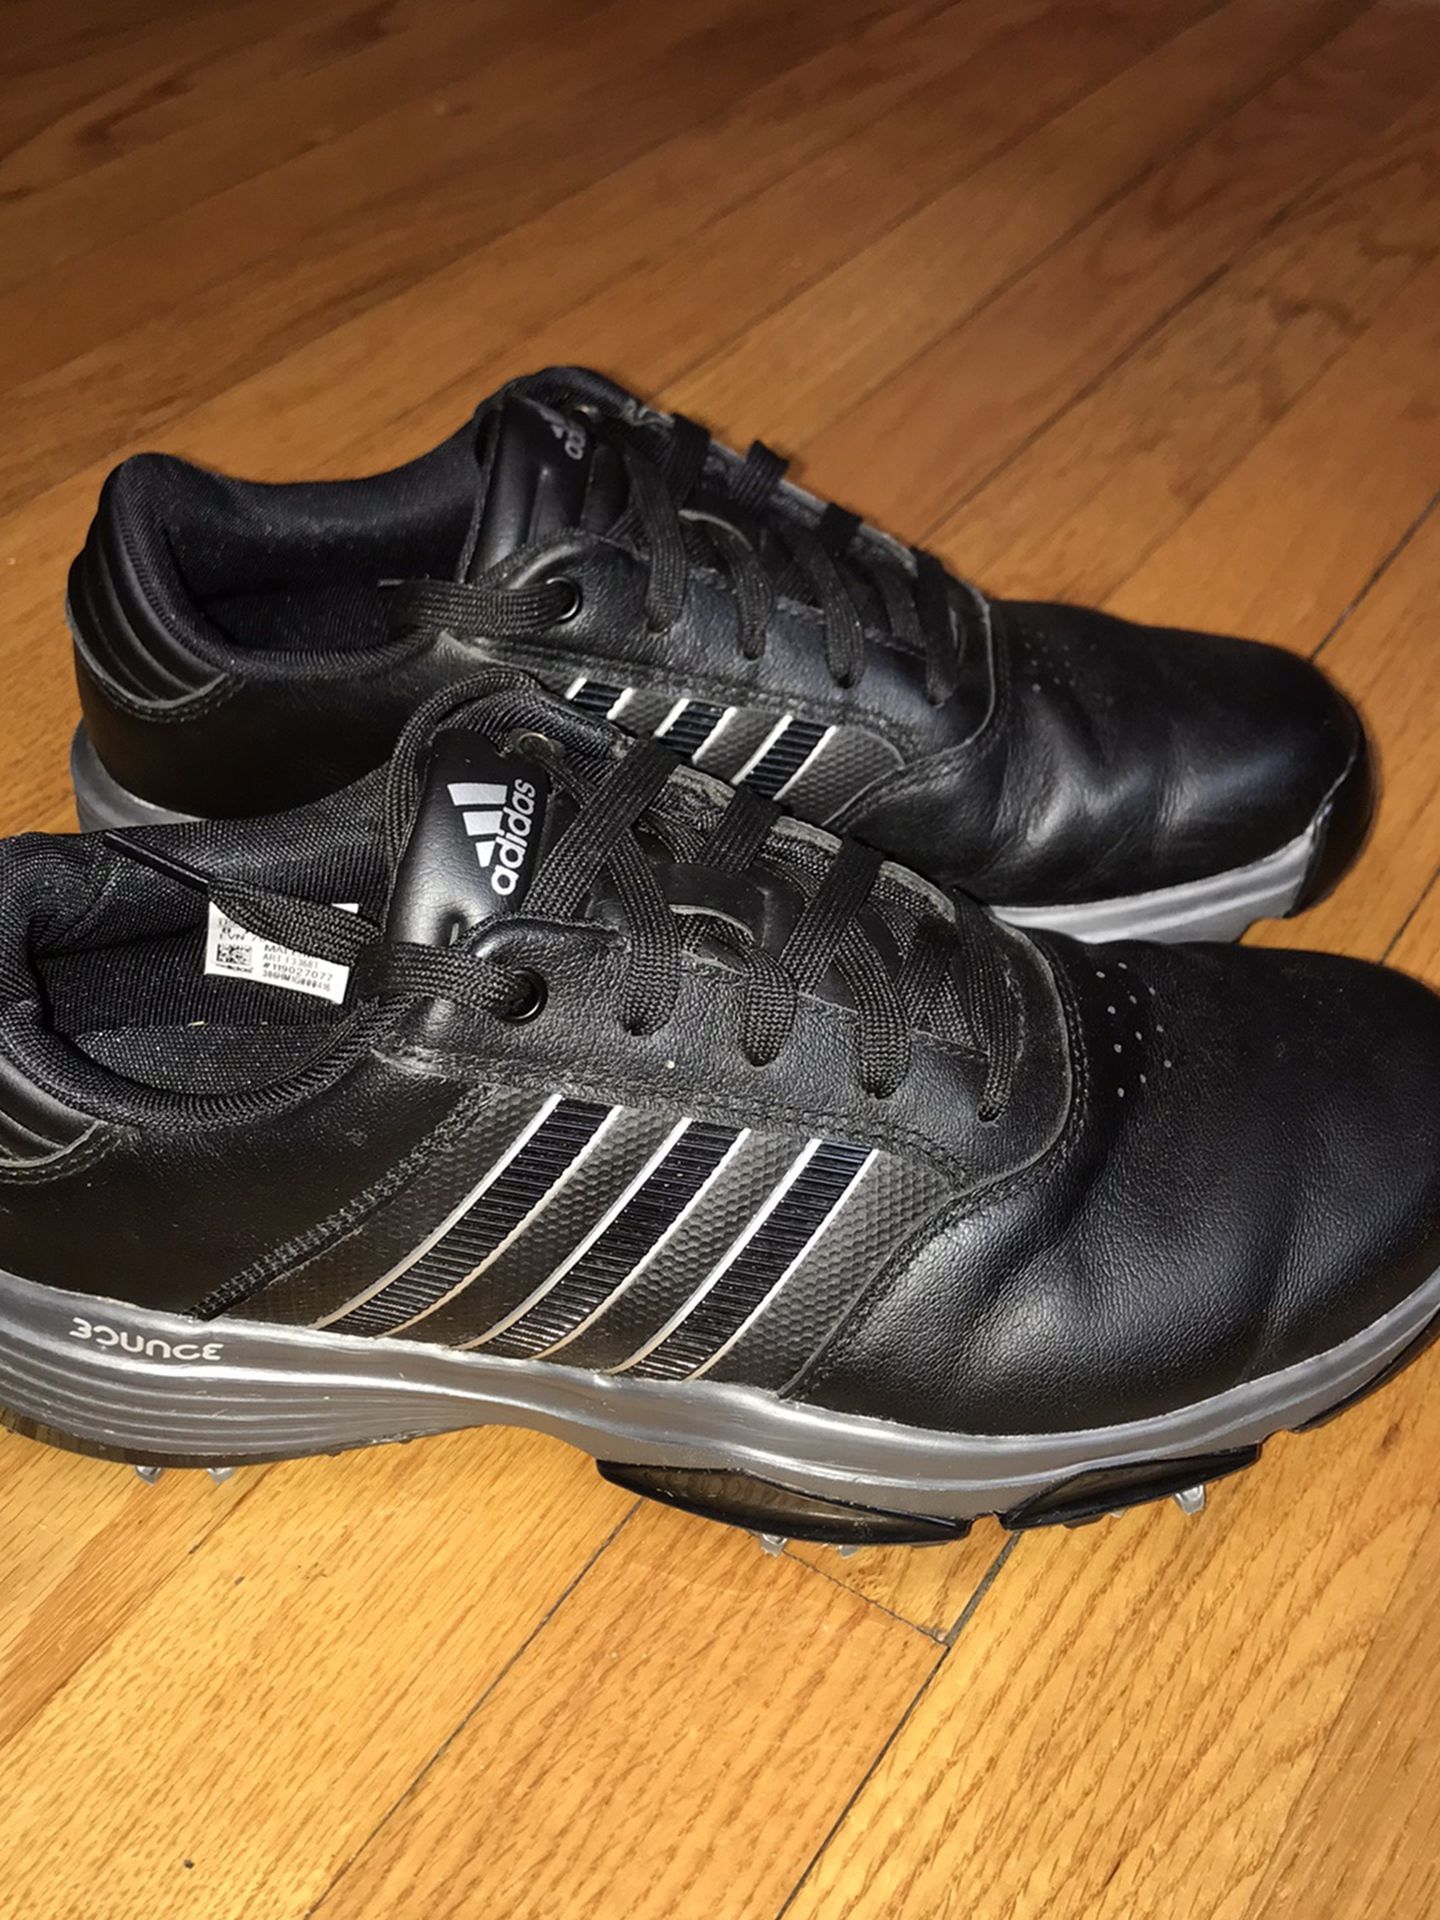 Adidas Mens 360 Bounce F33681 Black Soft Spikes Golf Shoes Size 8 Gently used